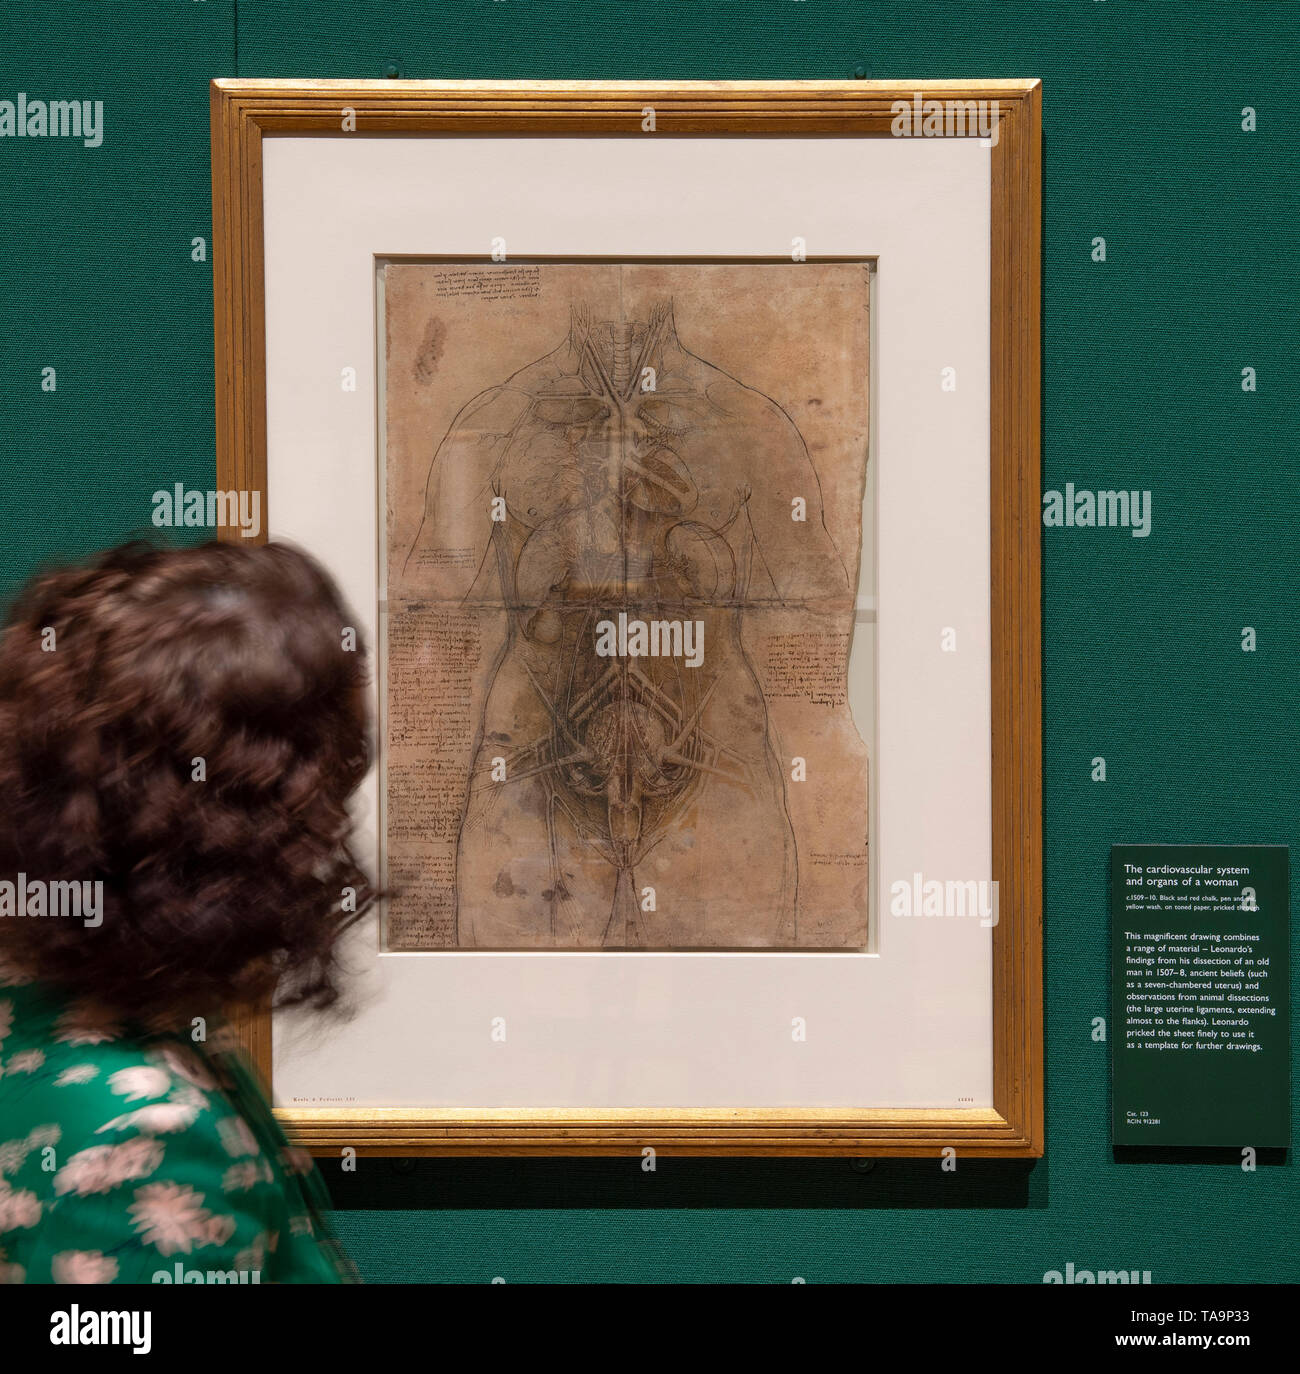 The Queen’s Gallery, London, UK. 23rd May 2019. Leonardo da Vinci: A Life in Drawing is the largest exhibition of Leonardo’s work in more than 65 years, and marks the 500th anniversary of the artist’s death. The exhibition features over 200 drawings by Leonardo, drawn from The Royal Collection. Image: The cardiovascular system and principal organs of a woman, c1509-10. The exhibition runs from 24 May-13 October 2019. Credit: Malcolm Park/Alamy Live News. Stock Photo